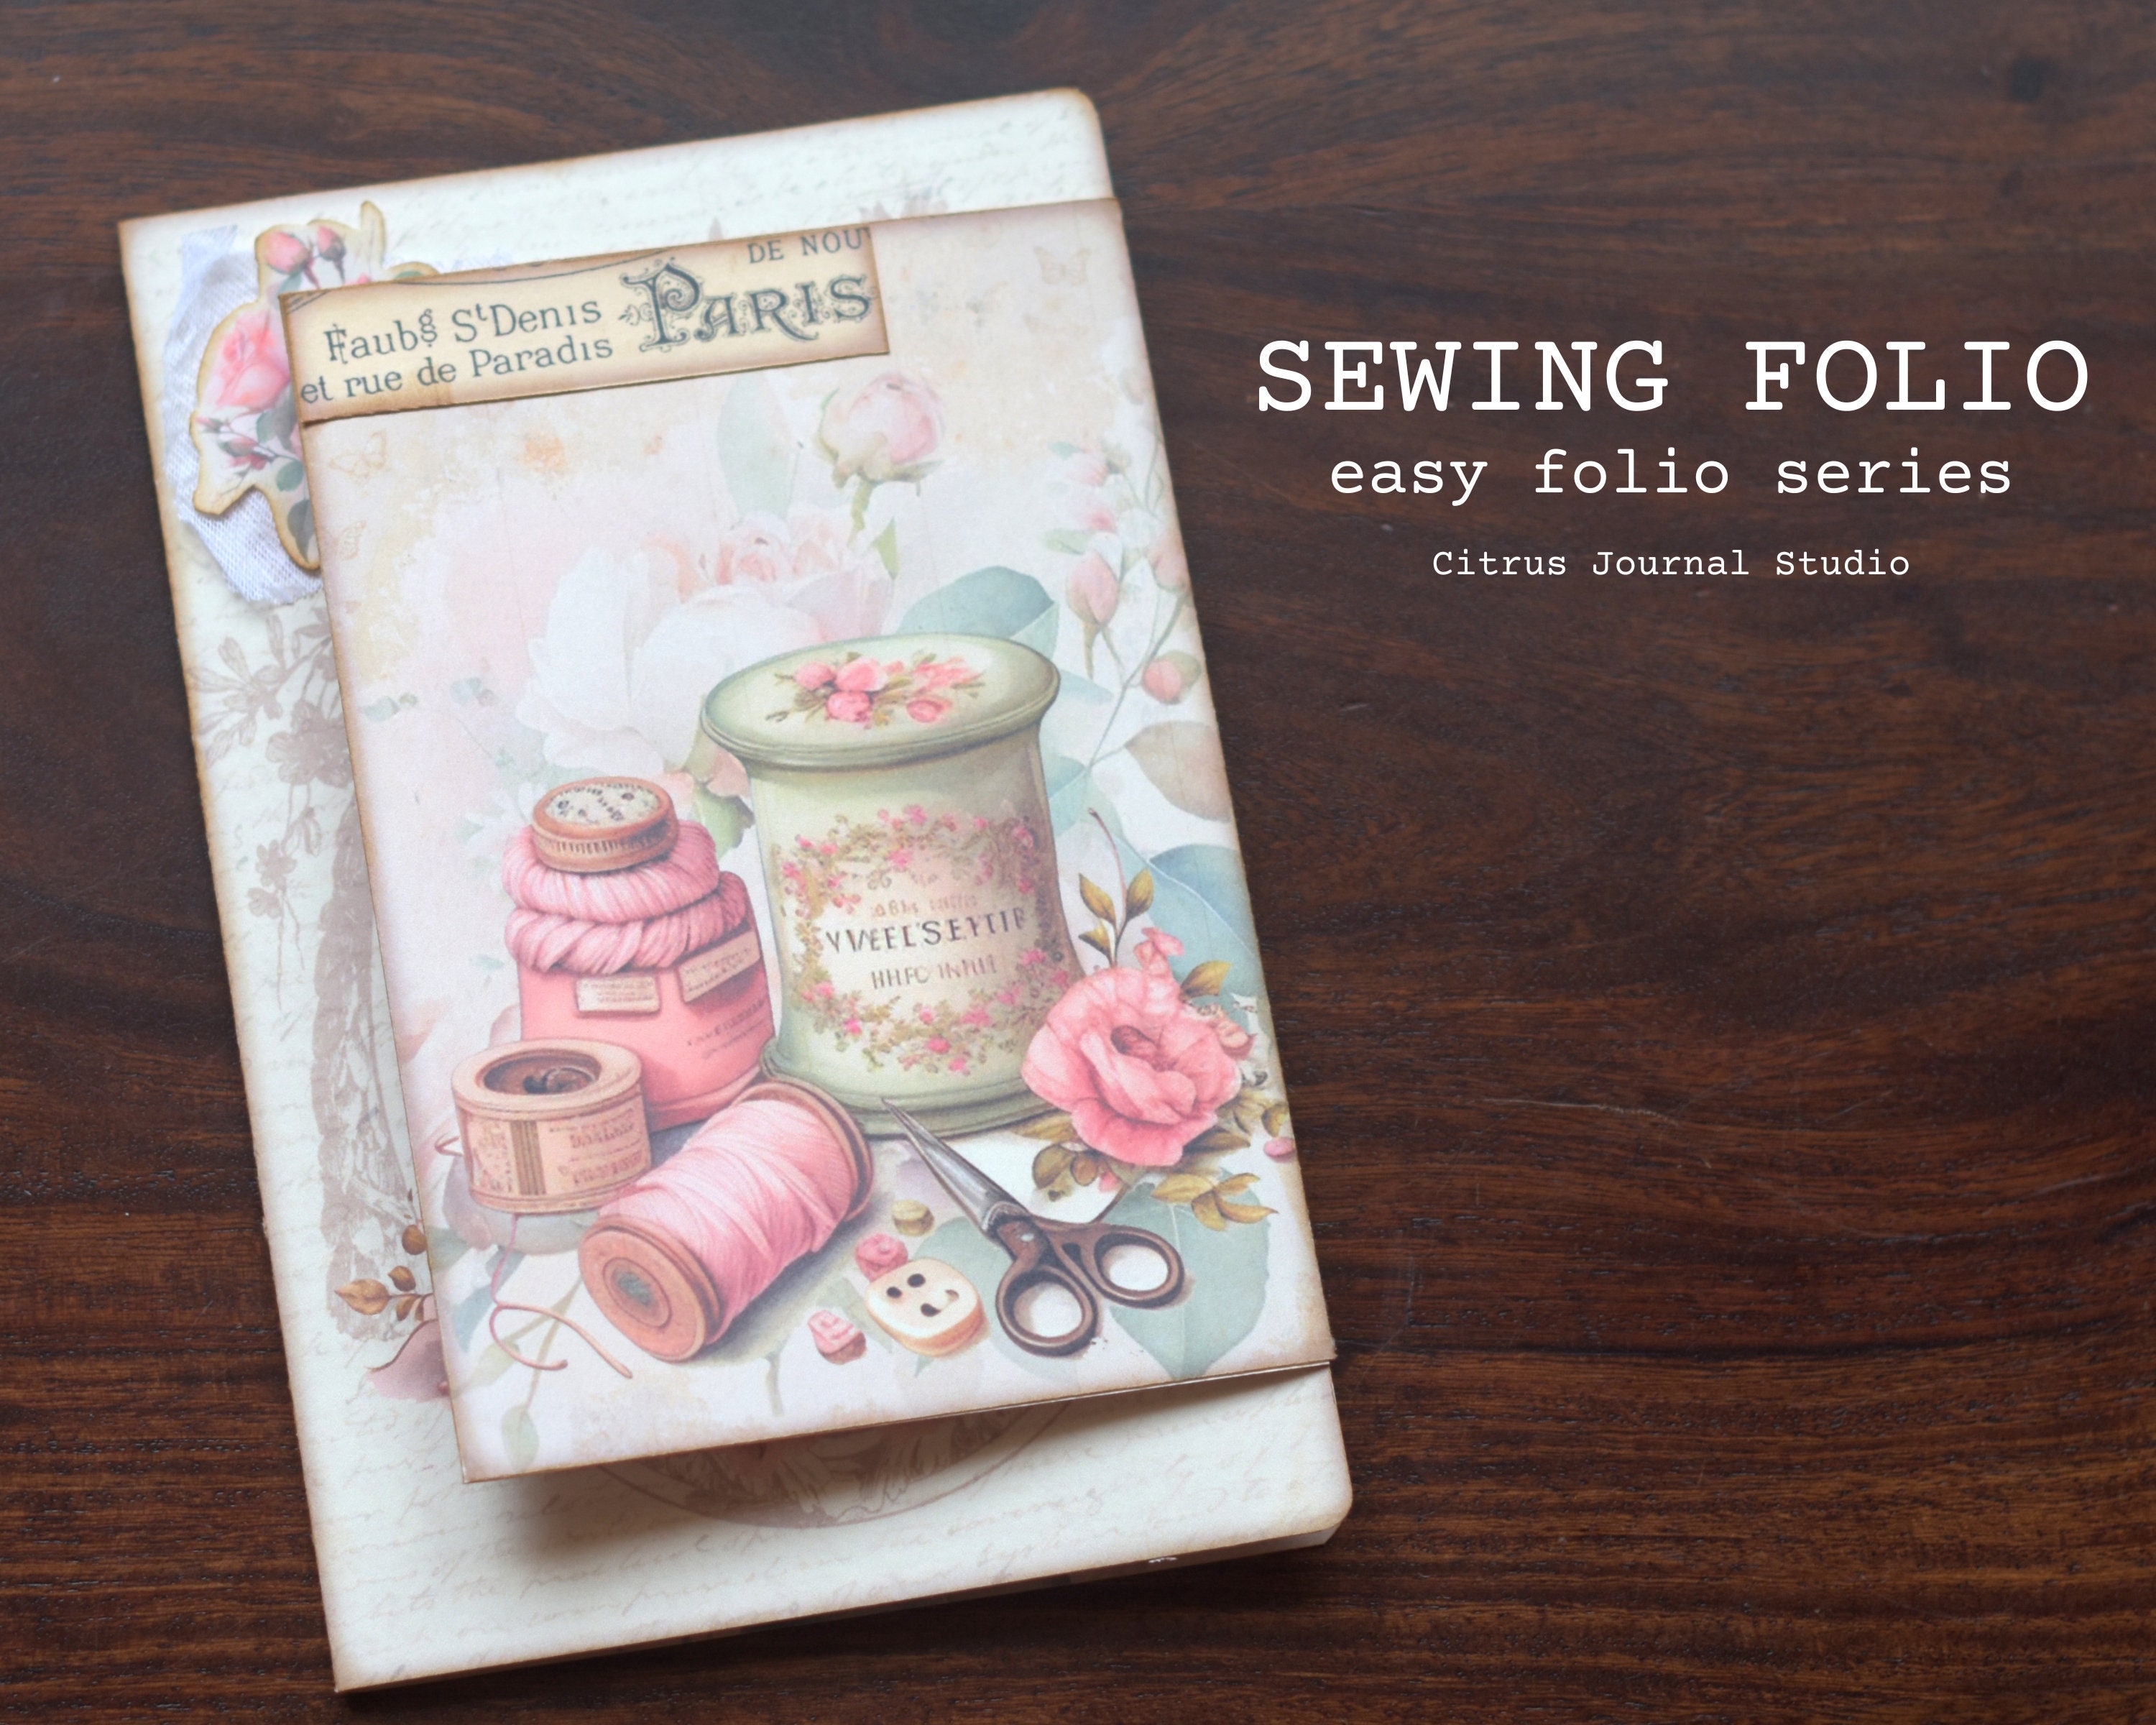 Embroidery Journal Page, Sewing, Needle Work Journal Kit, Vintage